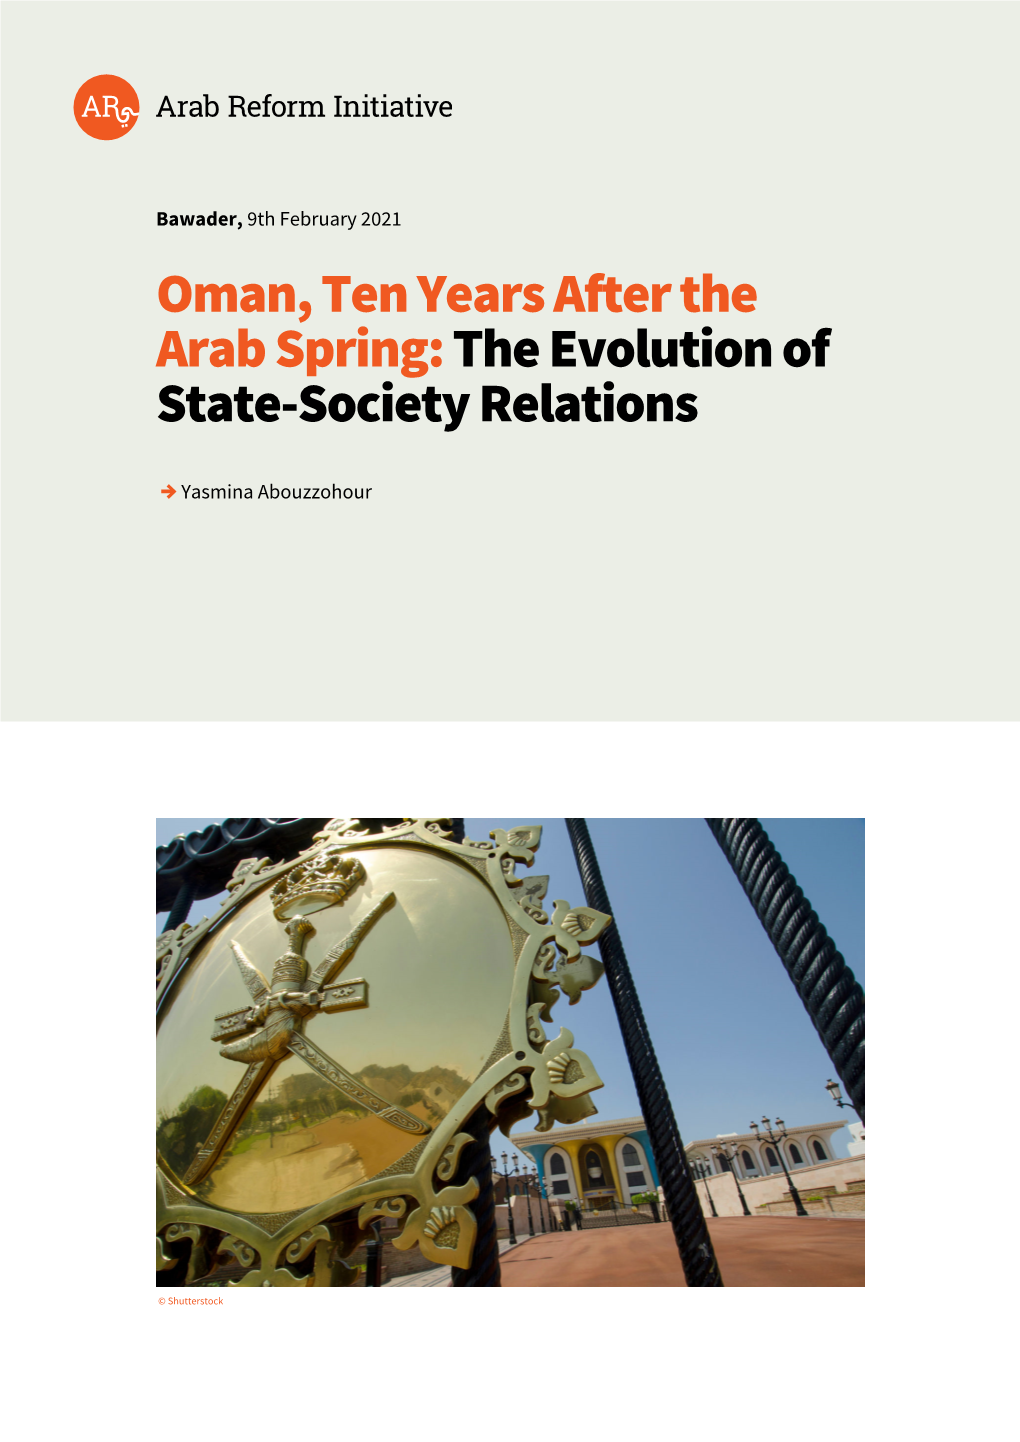 Oman, Ten Years After the Arab Spring: the Evolution of State-Society Relations